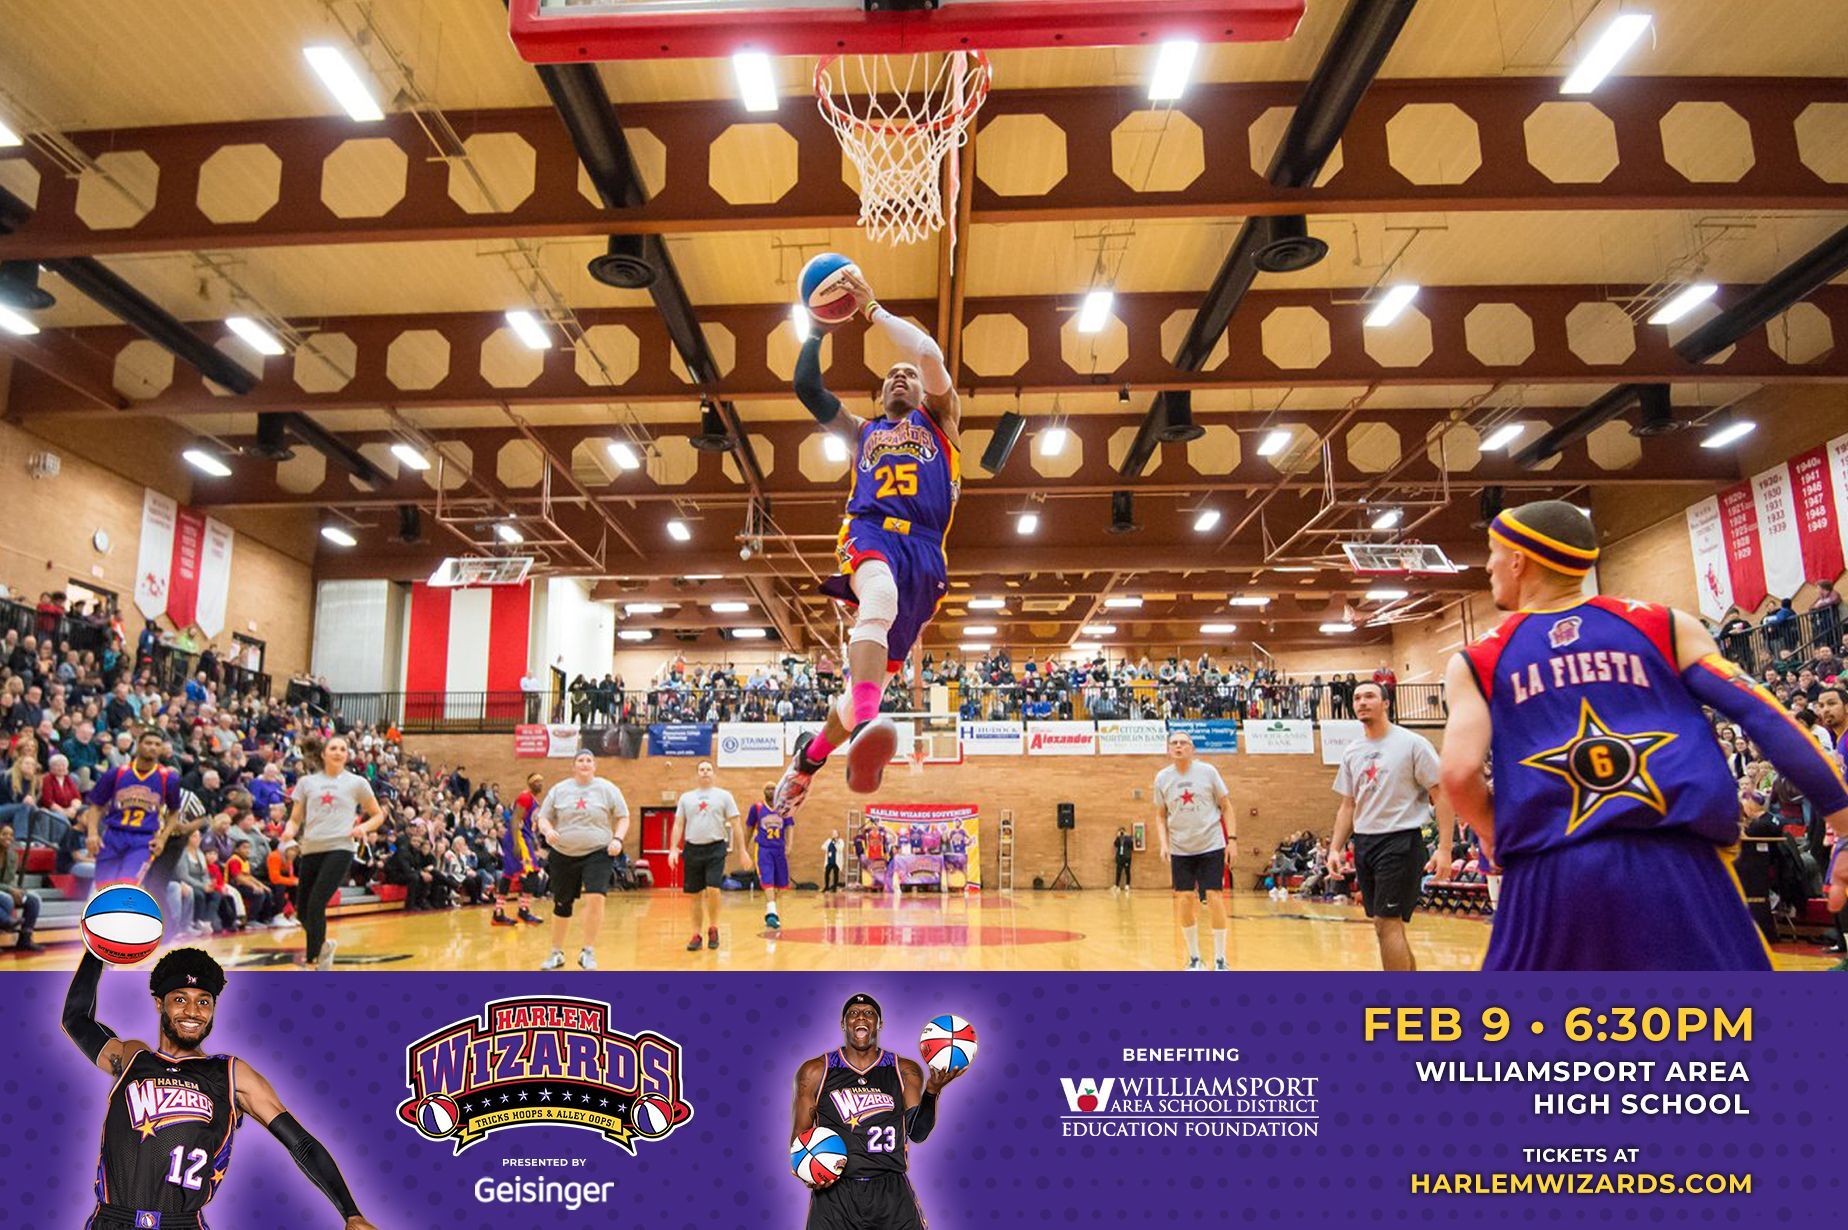 'Millionaire Magicians' Roster Released: 29 Join District Team to Take on the Harlem Wizards